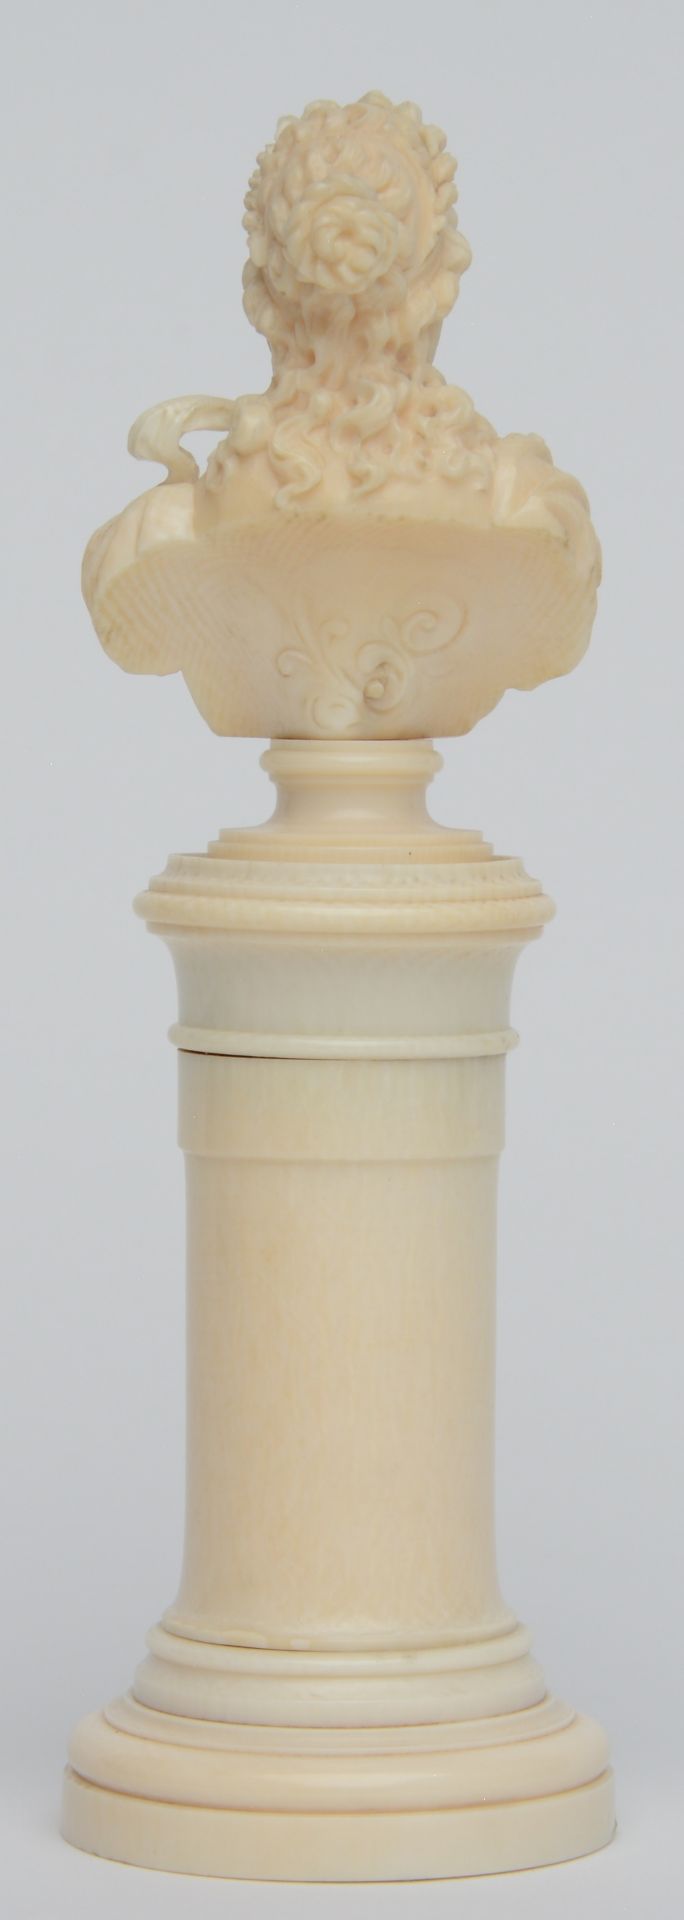 An exceptional finely carved ivory ladies bust on a Neoclassical base, Dieppe, ca. 1850, H 19 cm, - Image 3 of 6